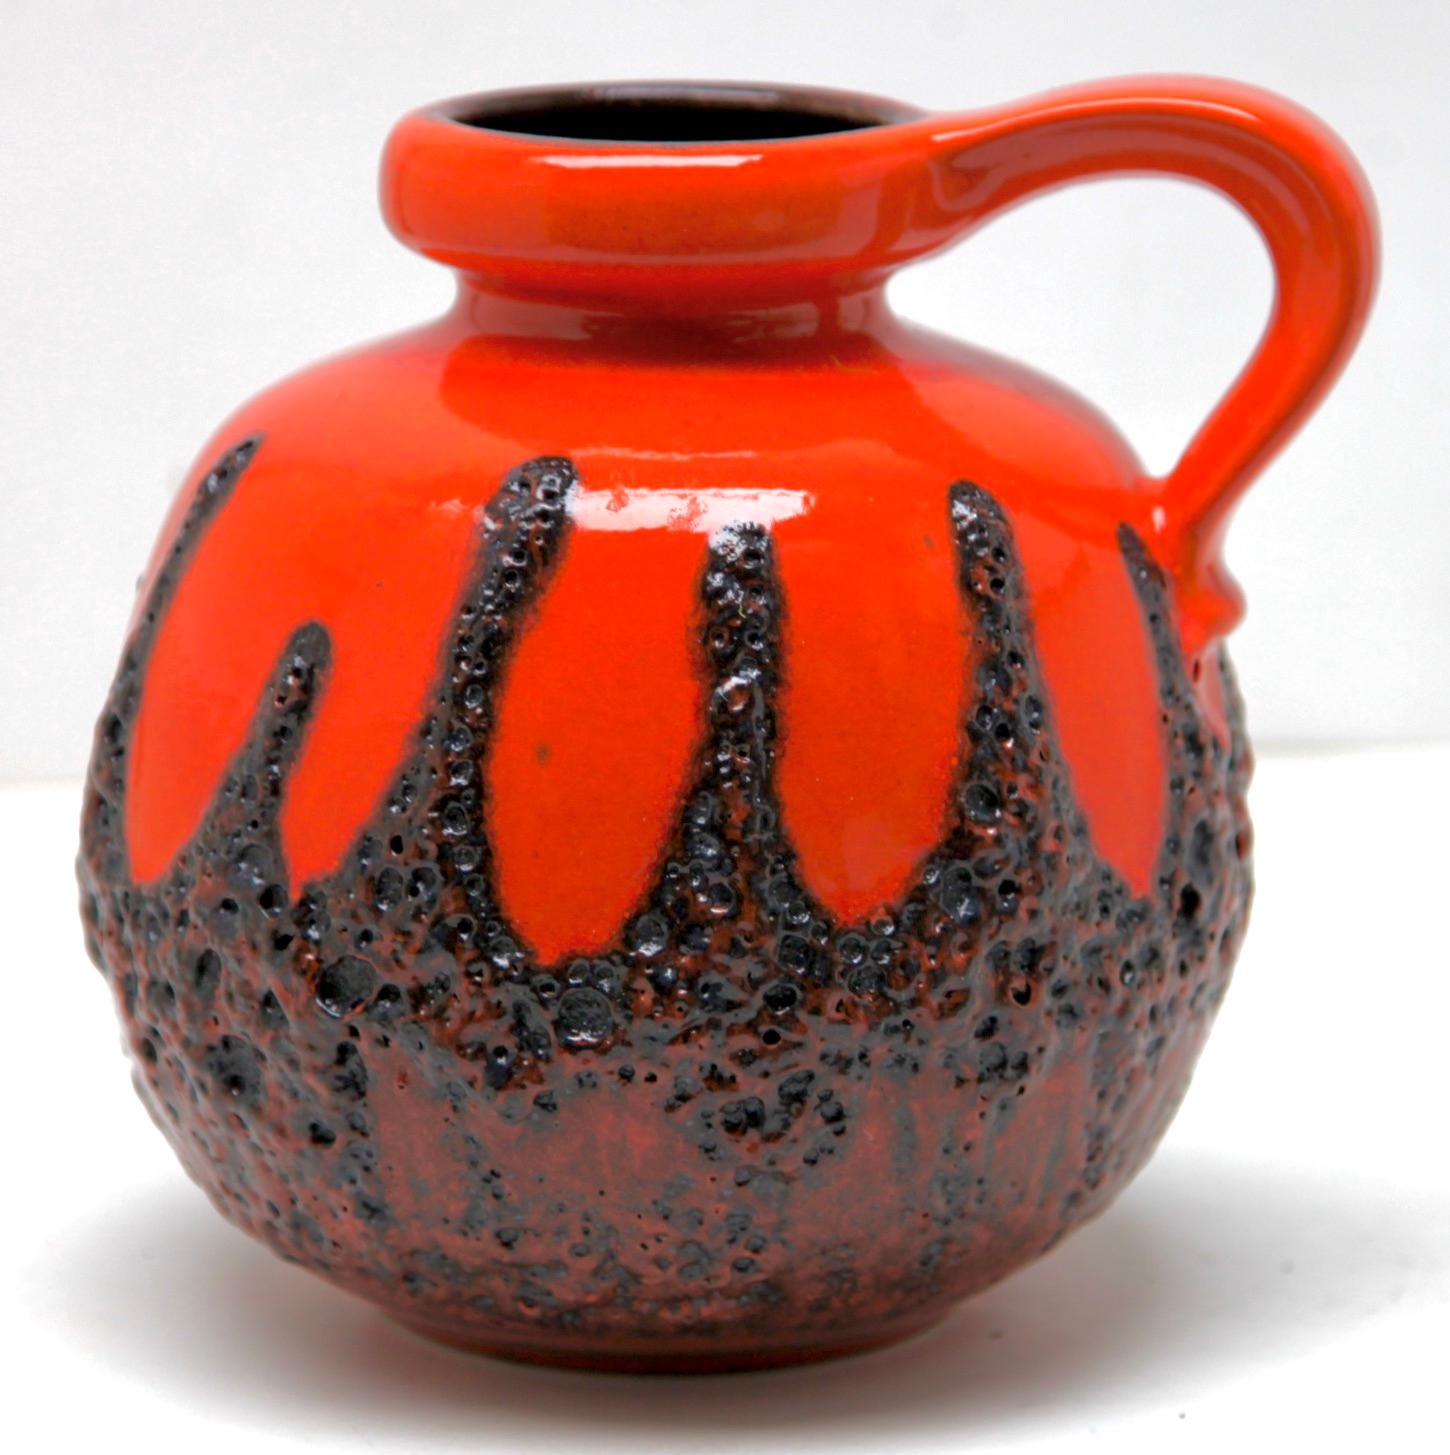 Classic fat lava red drip-glaze on charcoal background. vase with handle. 
Vintage Scheurich 
Glazed pottery.
Stamped on the base. 484-21, W-Germany.
Measures: 23 x 21 cm 
The piece is in excellent condition and a real beauty.
  
   
   